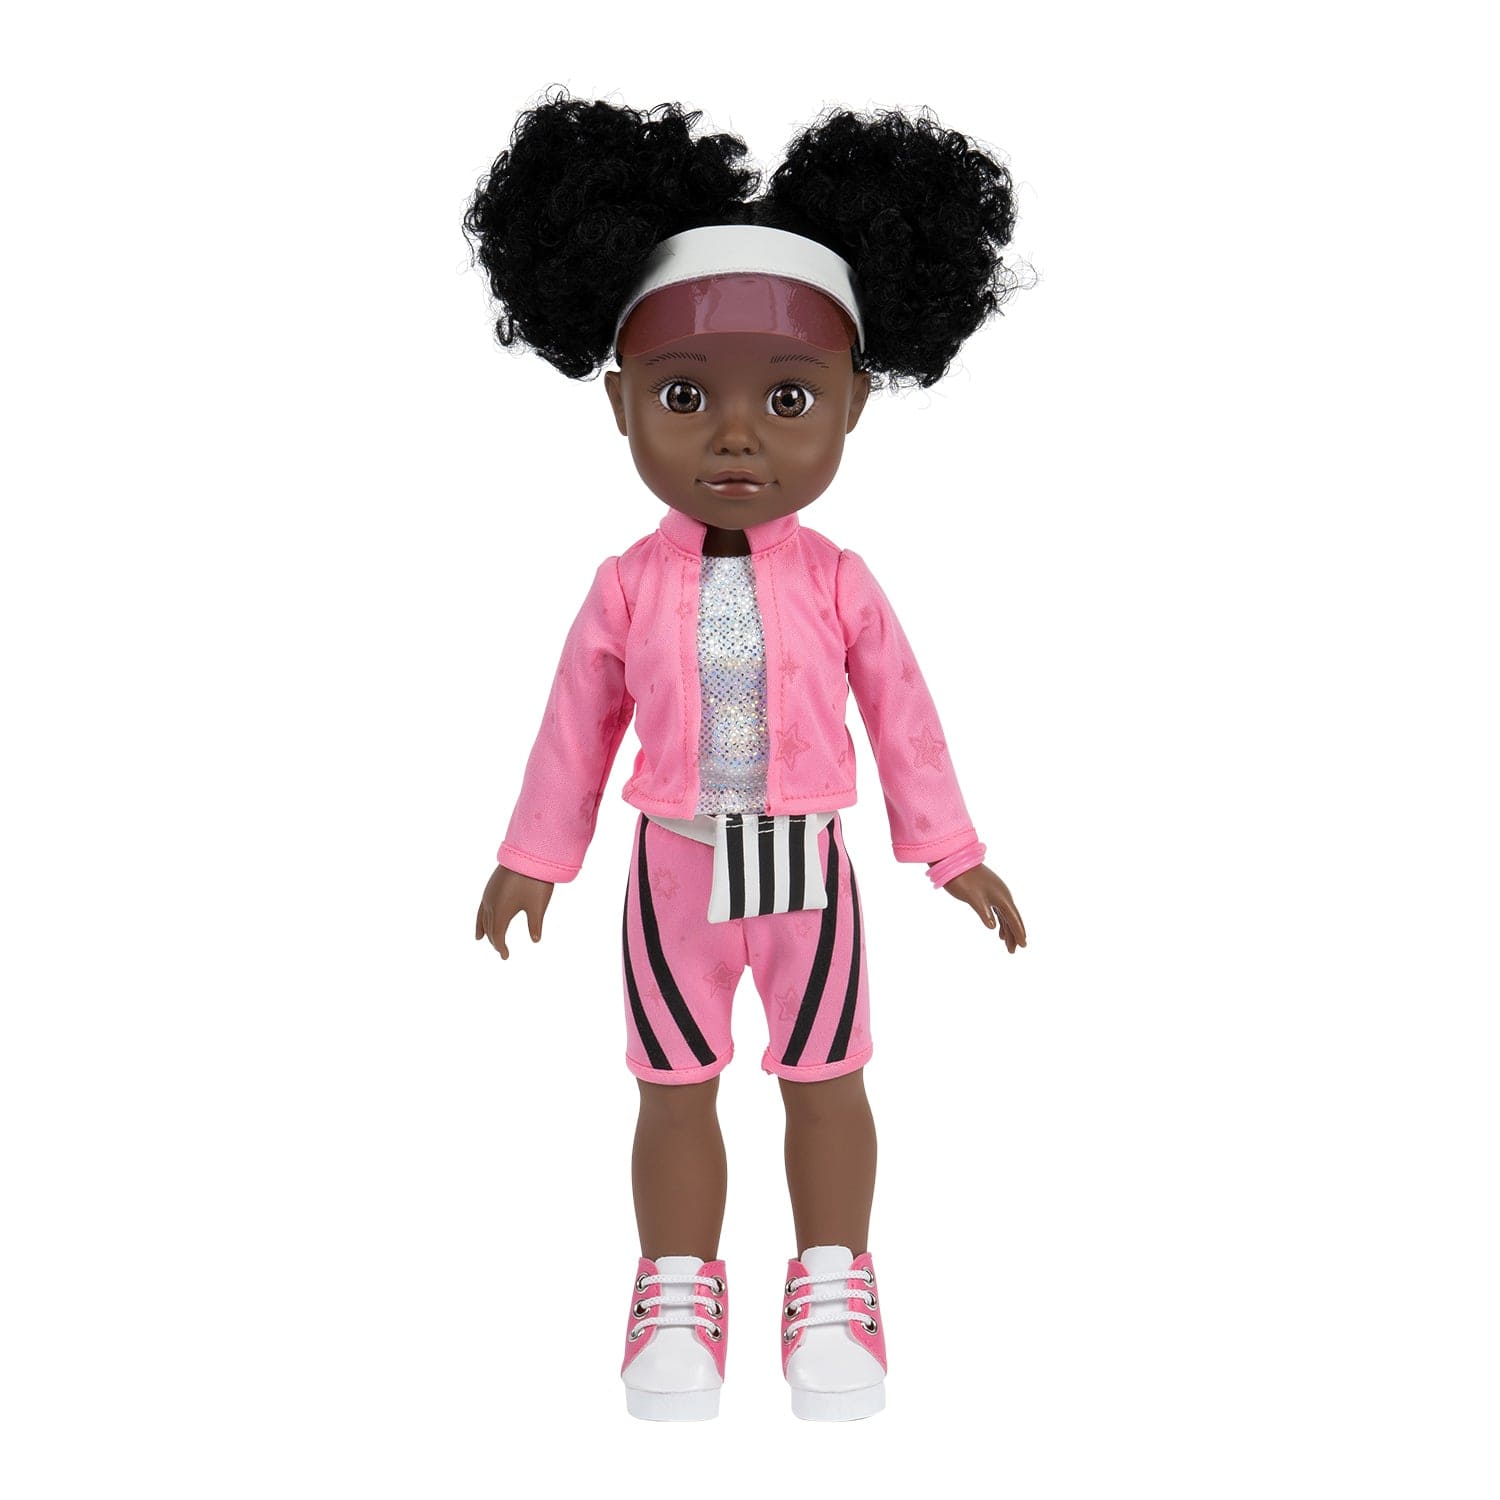 Serena from Adora's Glow Girl Collection! Feauring glow-in-the-dark fashion and accessories